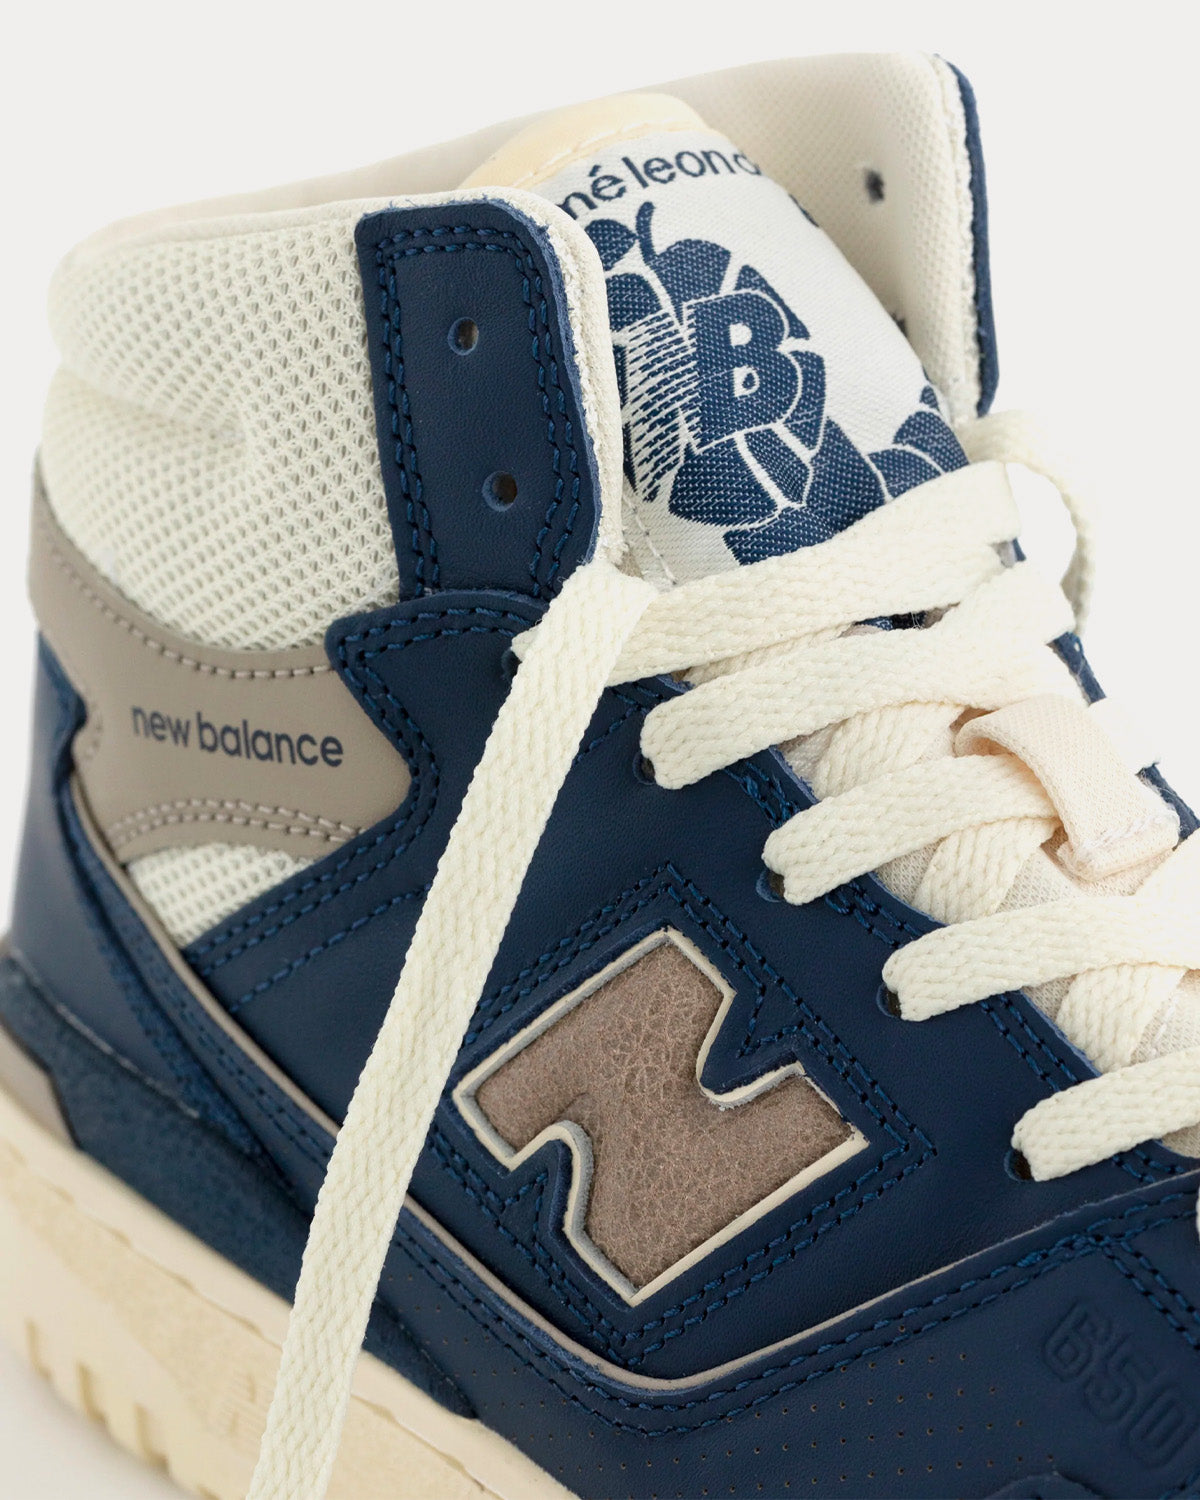 New Balance x Aime Leon Dore - 650r Navy High Top Sneakers